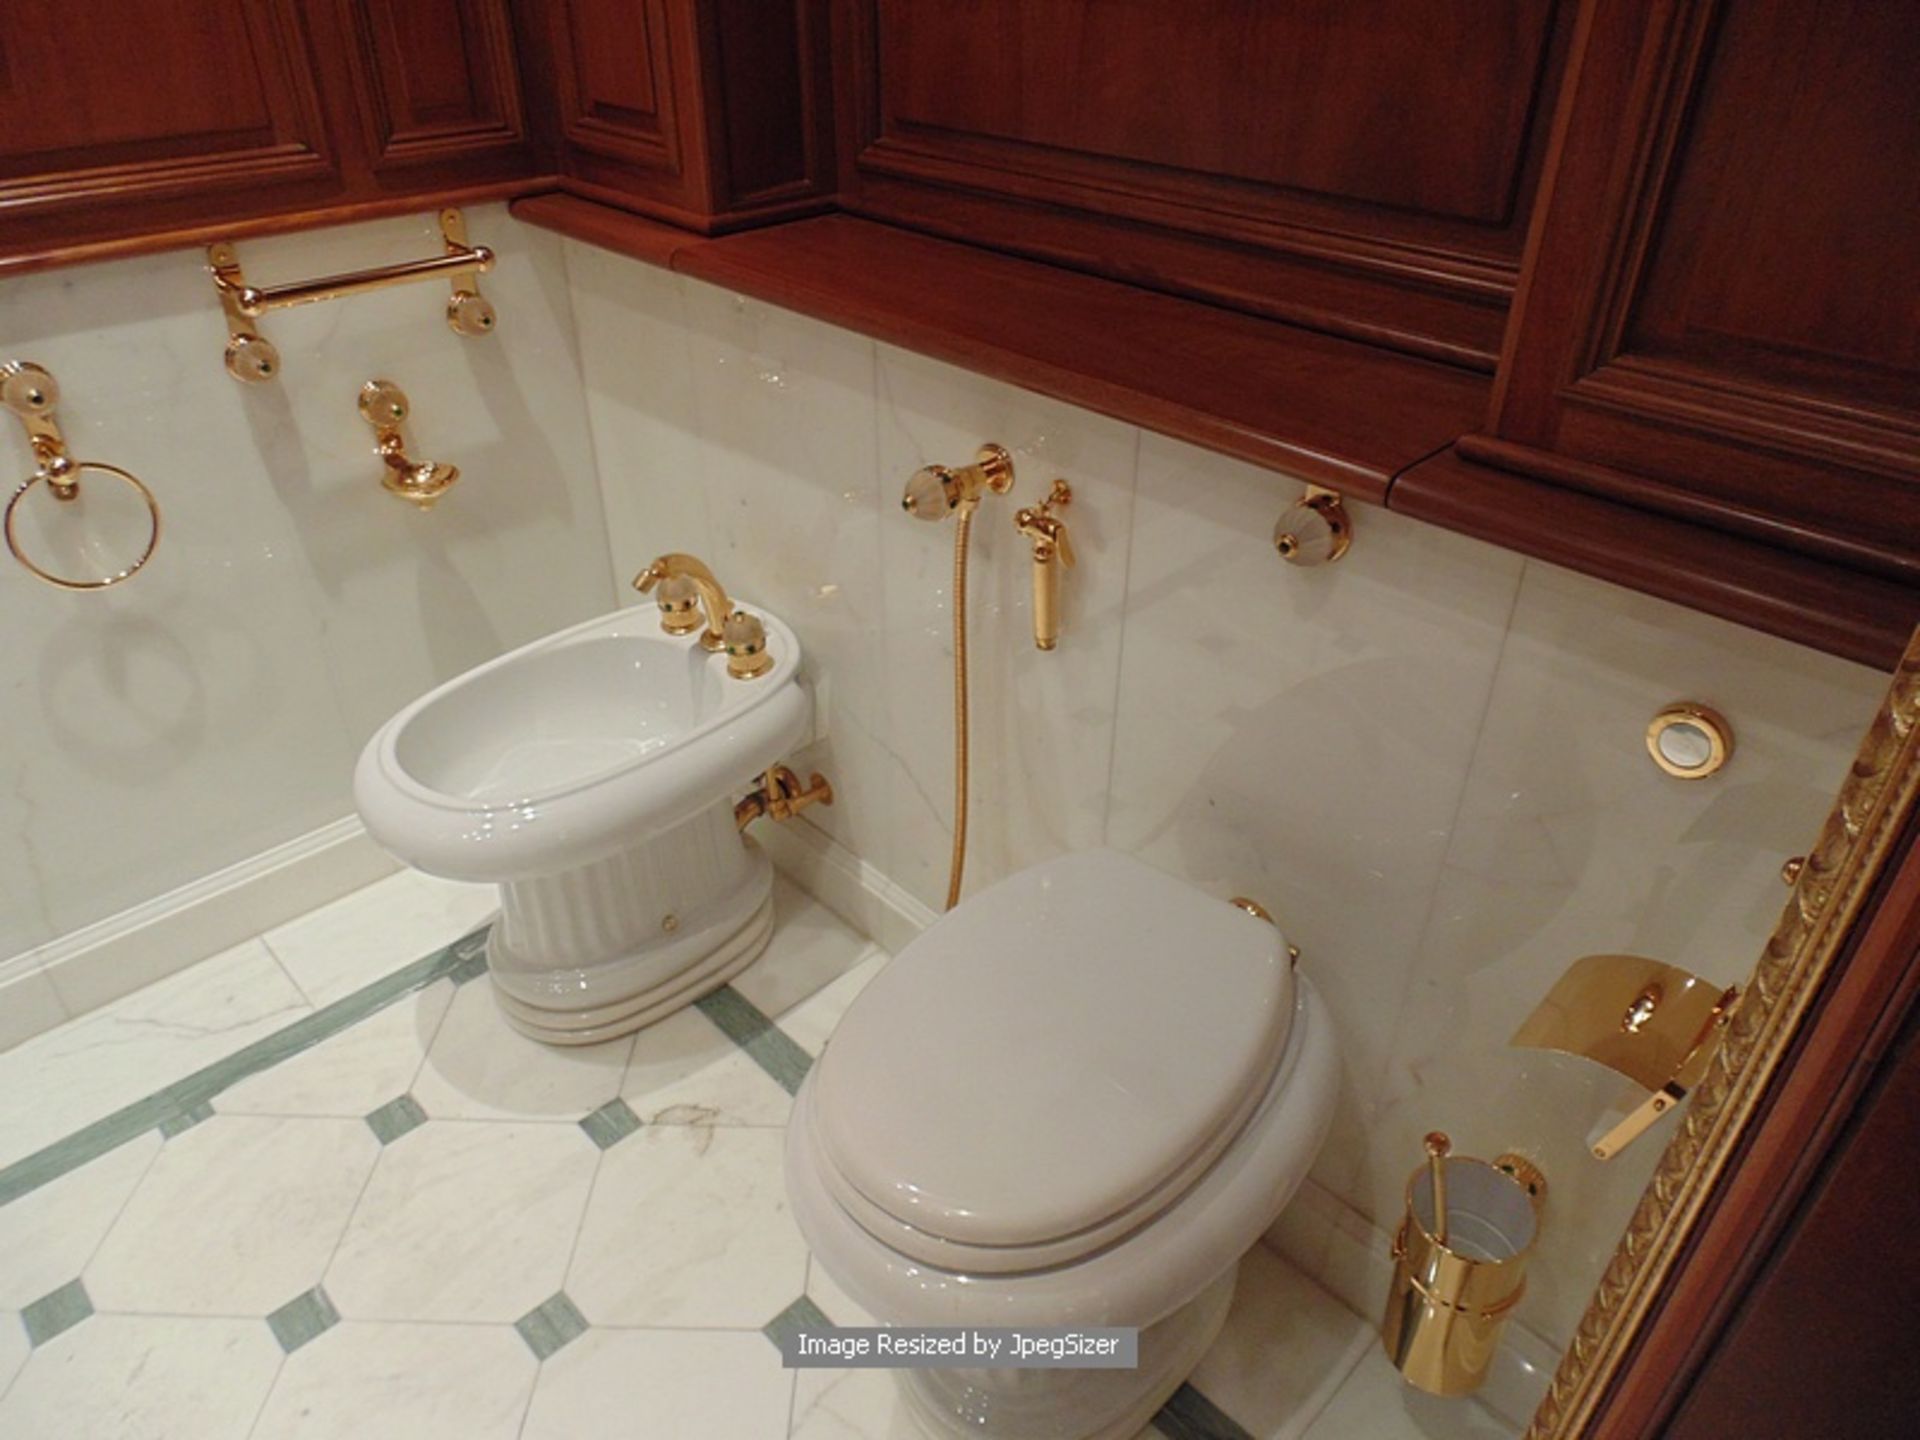 Cloakroom basins, vanity unit, bidet and WC bathroom accessories and furniture from Baldi Home - Image 3 of 3